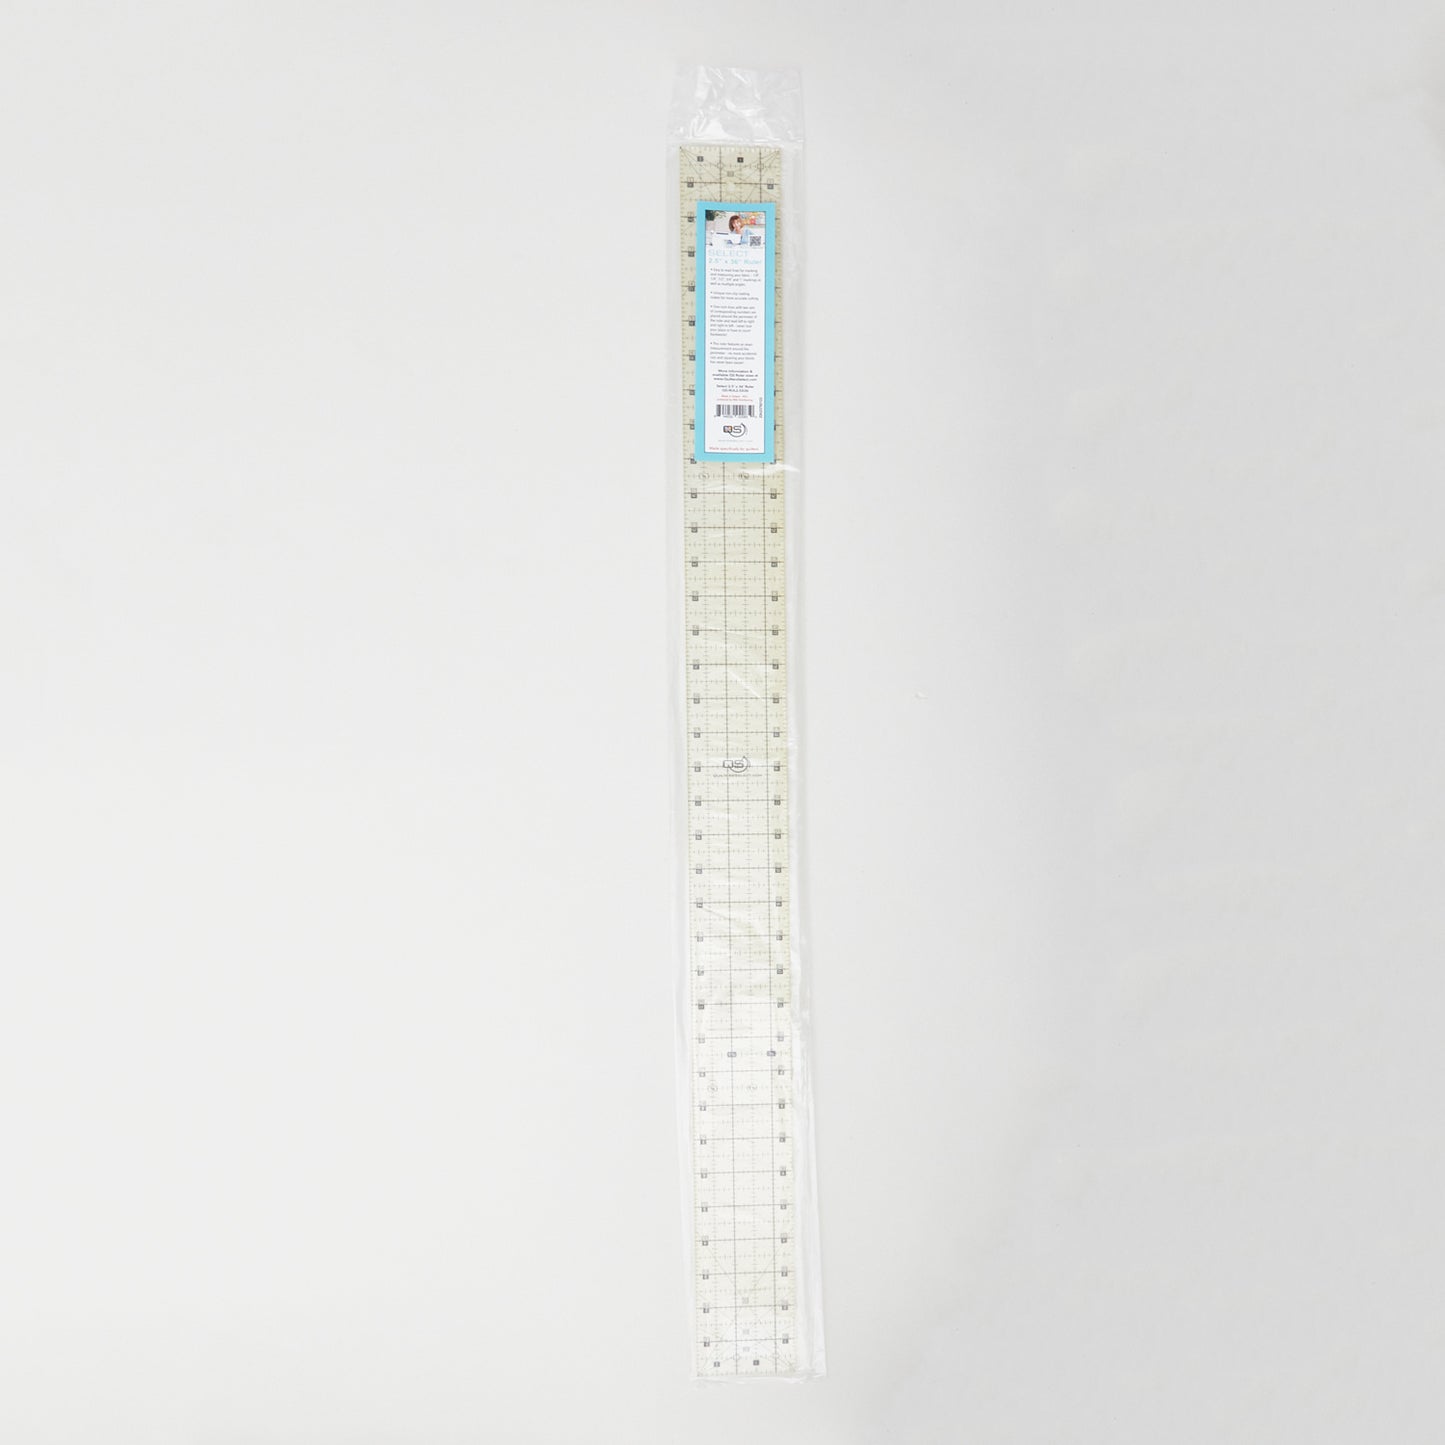 Quilters Select Non-Slip Ruler - 2.5" x 36" Alternative View #1